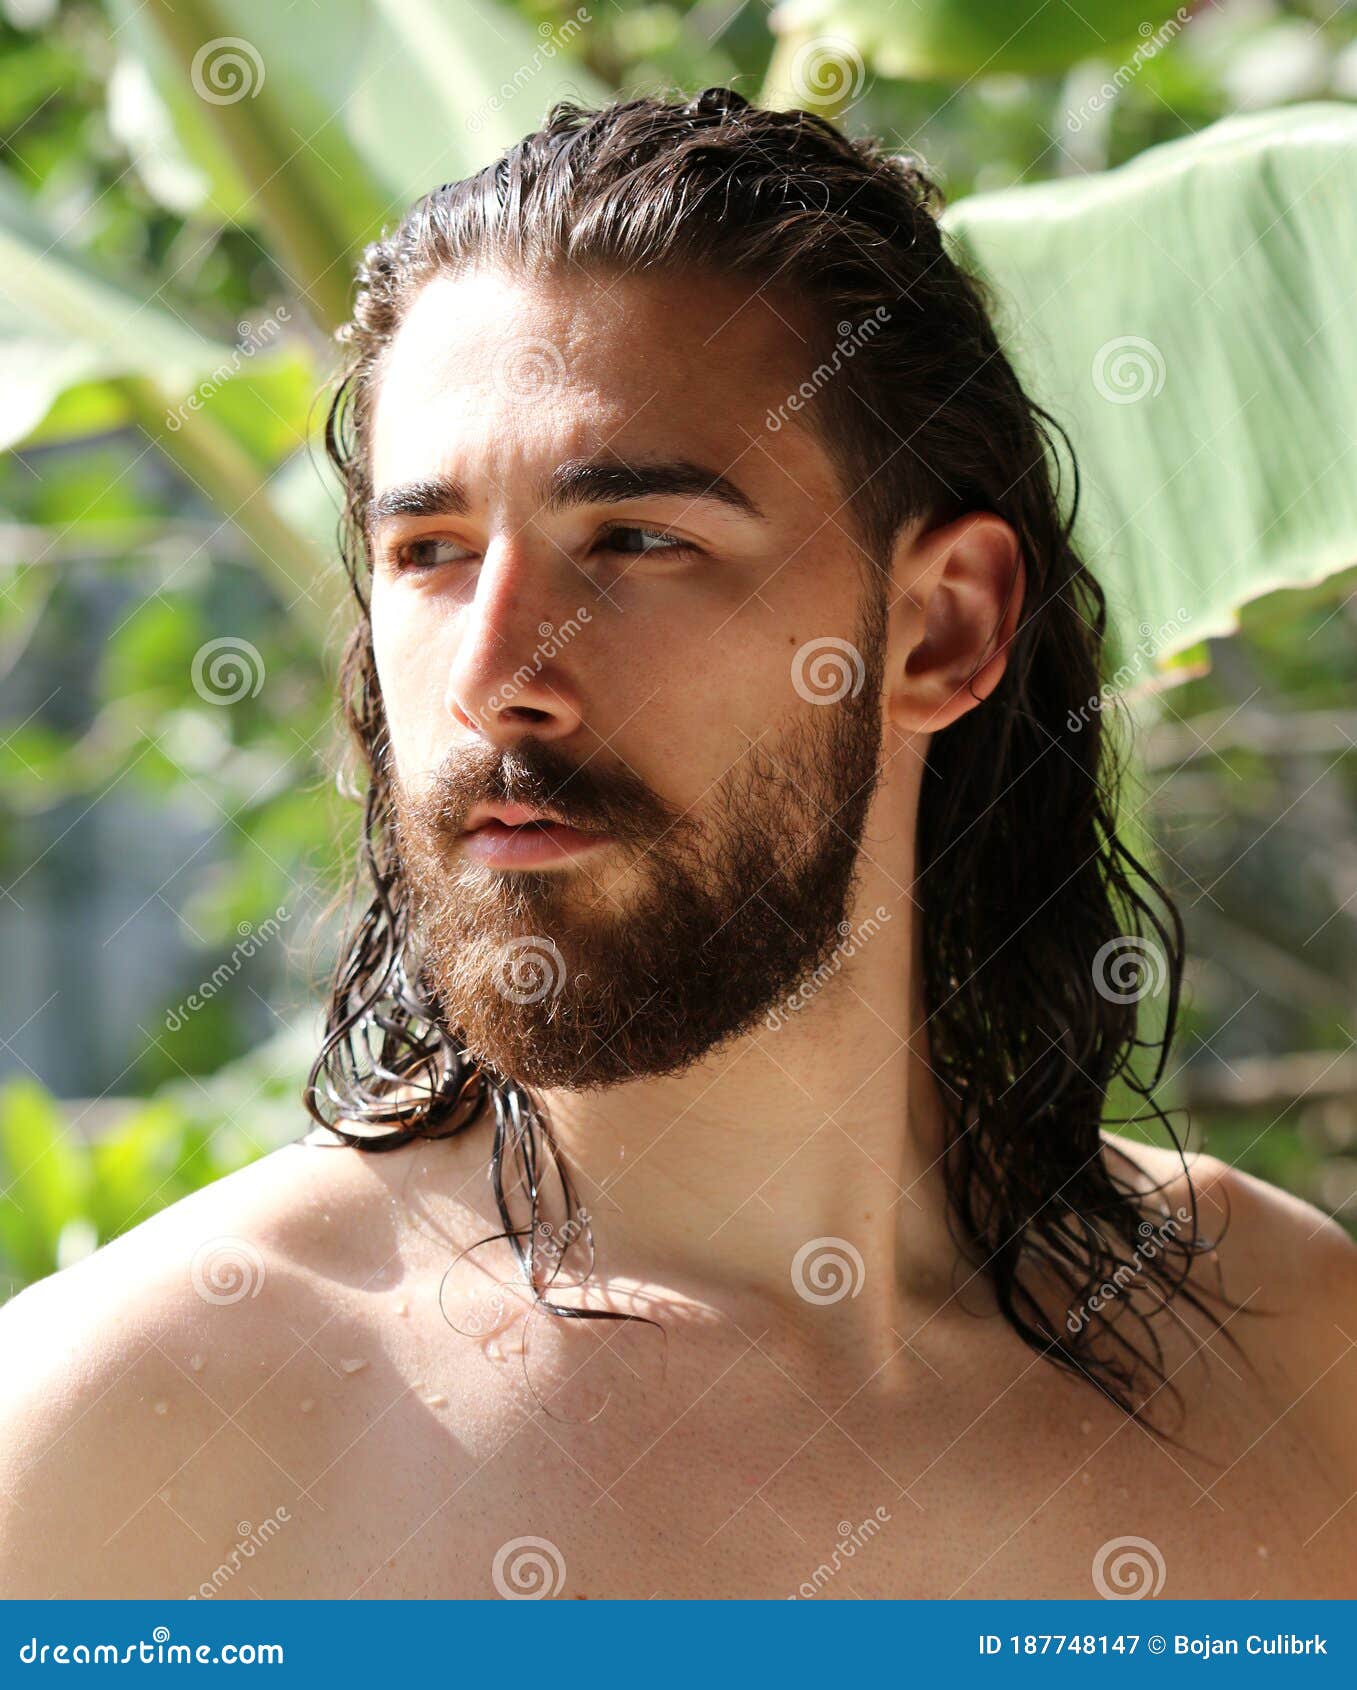 Young, Attractive Male Model with Long Hair and Beard Posing in Nature.  Stock Image - Image of looking, bearded: 187748147